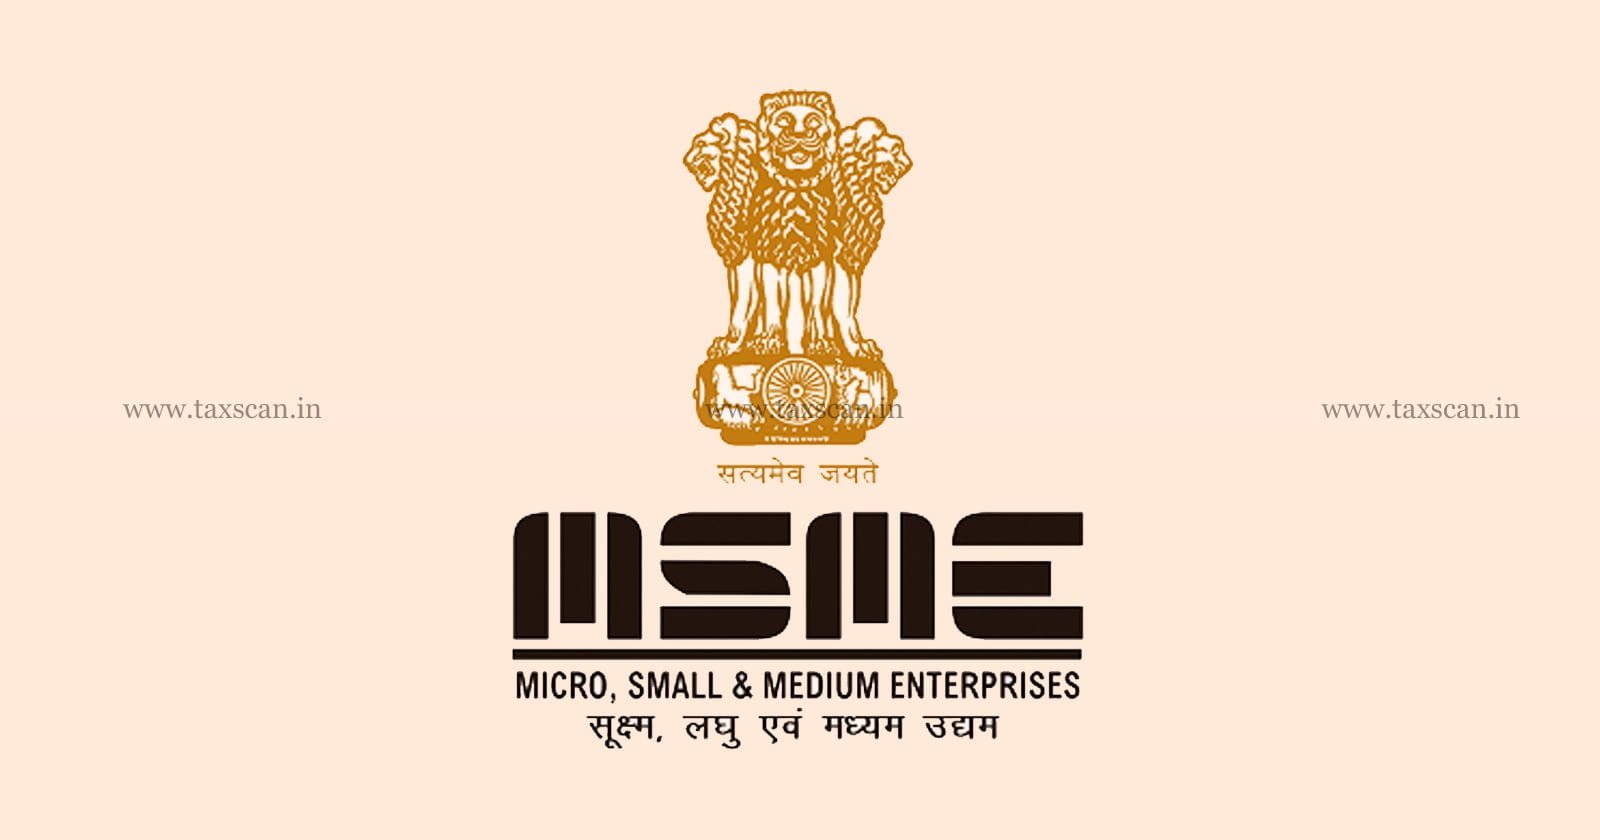 Unregistered MSME - MSEFC - MSME - MSMED Act 2006 - MSMED Act - taxscan